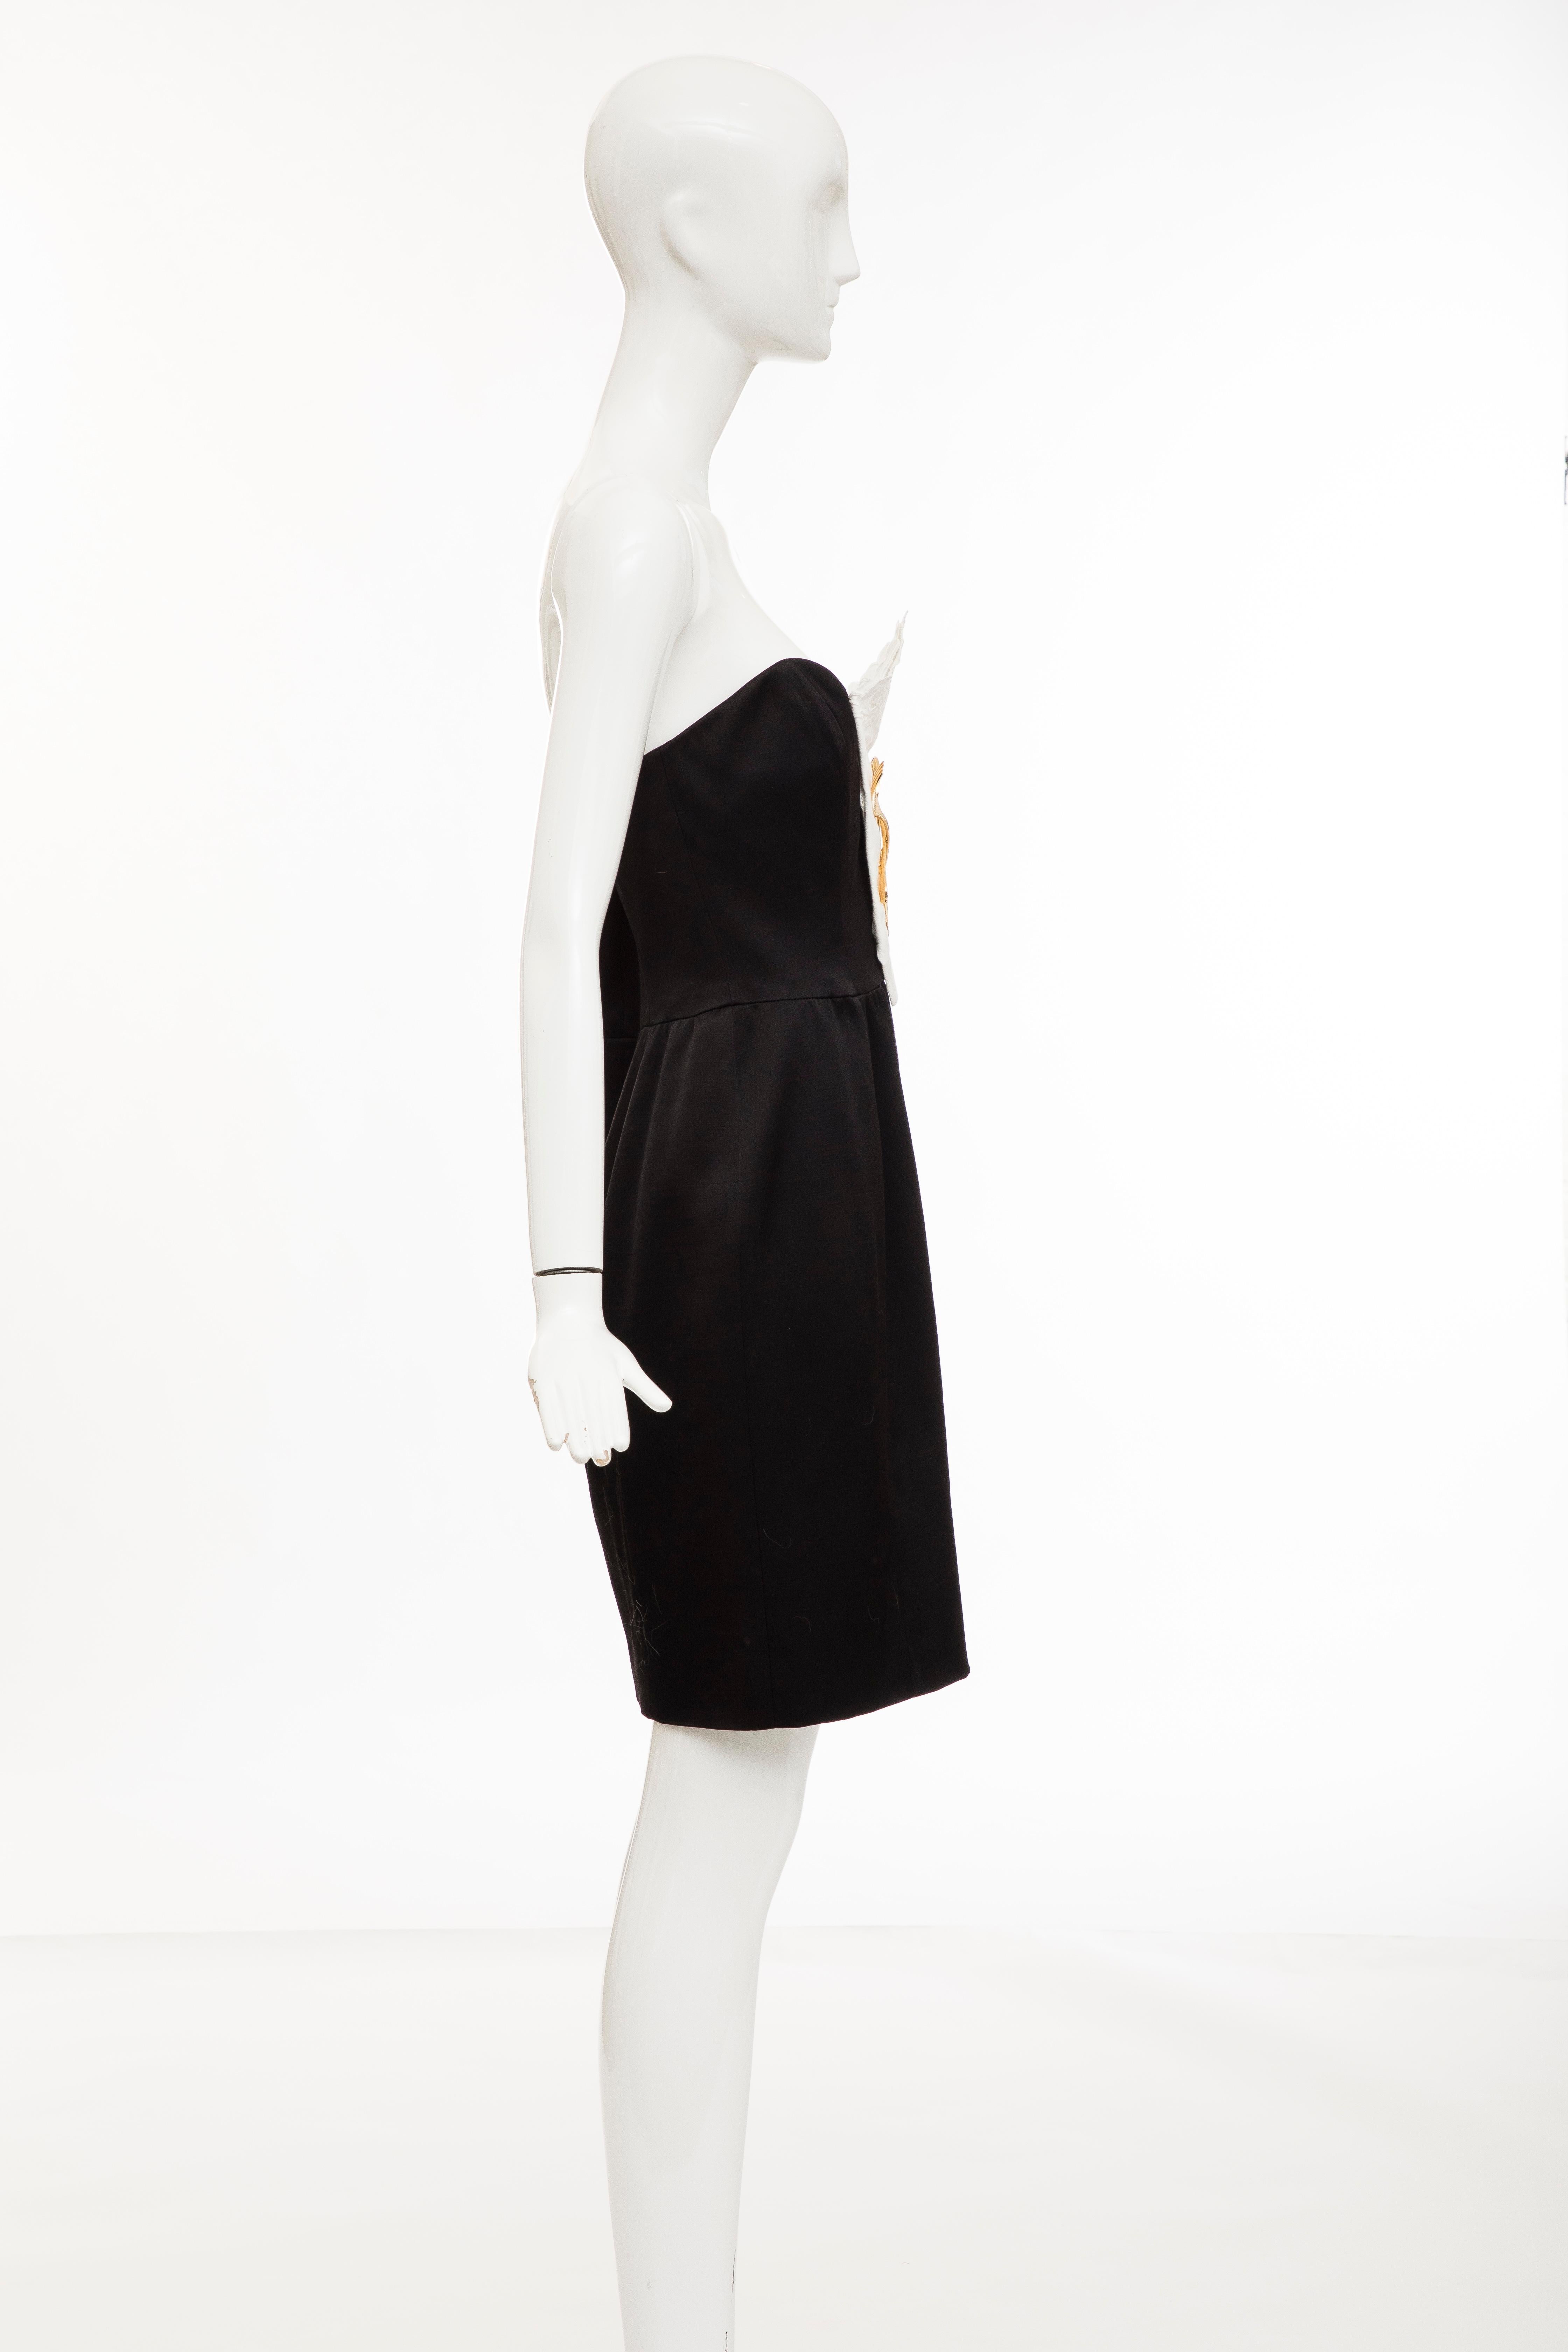 Women's Moschino Couture Black Wool Strapless Dress Show Off Collection, Fall 1989